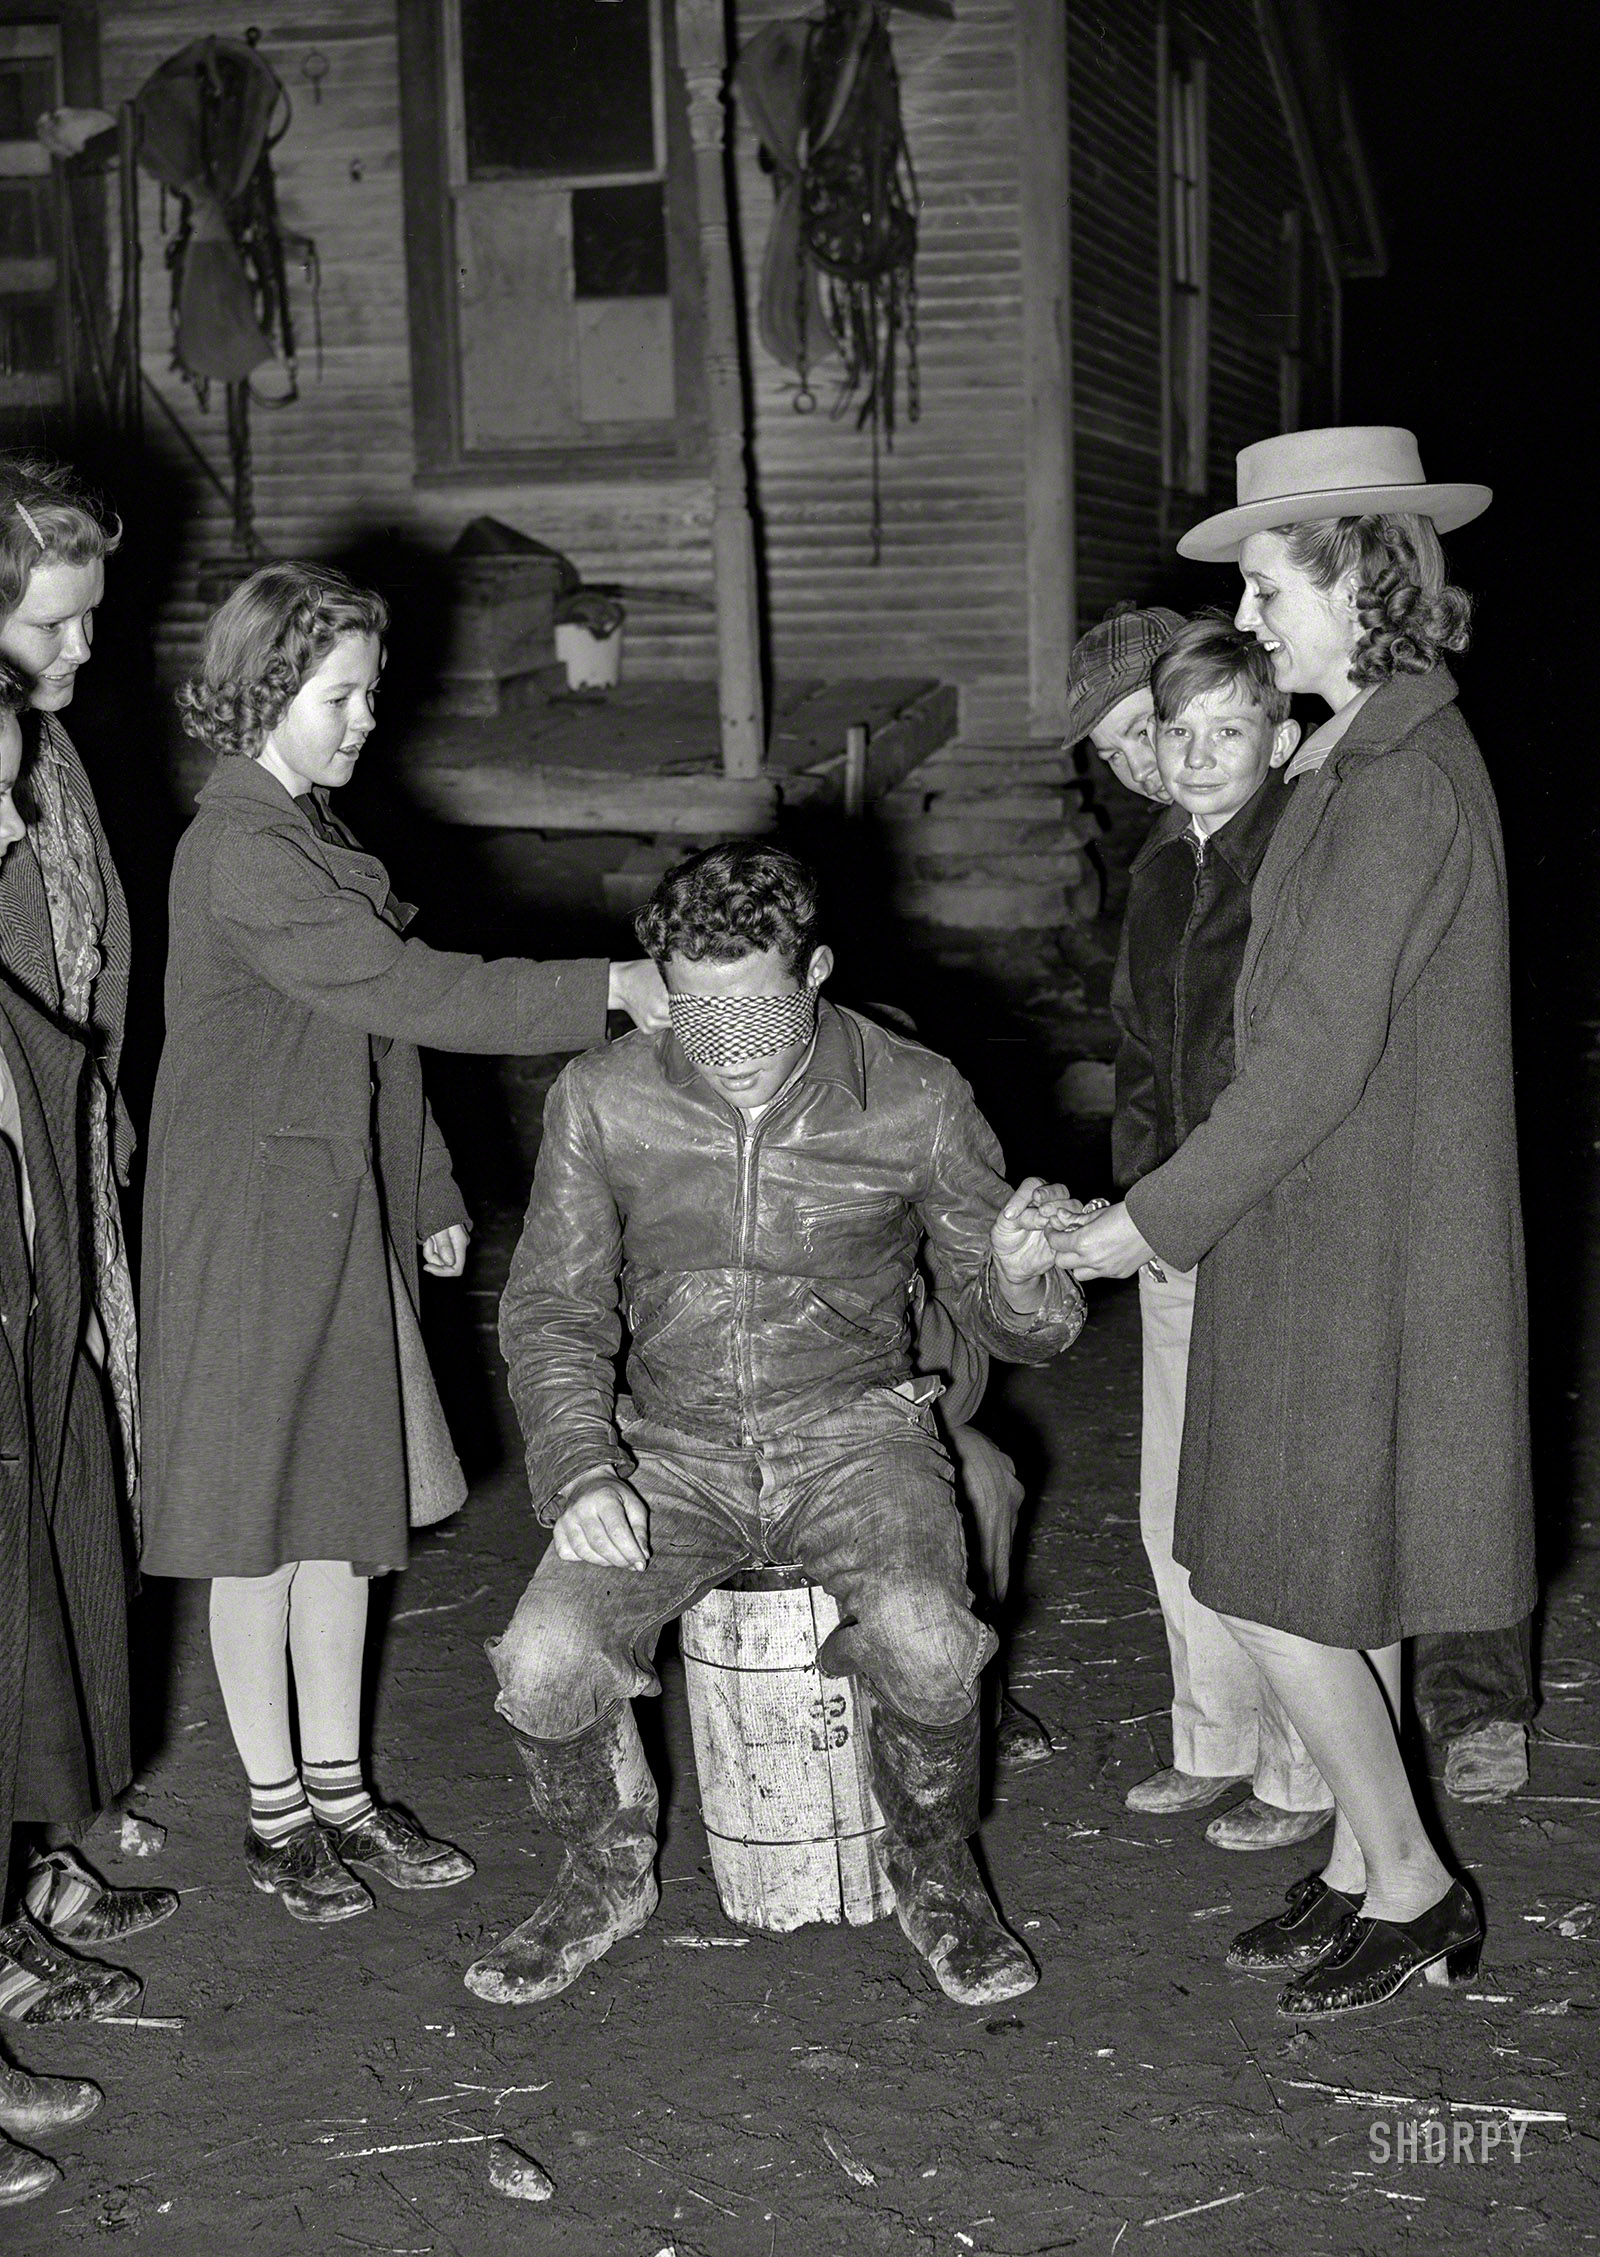 February 1940. "Playing the game 'Fishing for Love' at a 'play party' in McIntosh County, Oklahoma." When your parents think you're at "4-H" meeting. Photo by Russell Lee for the Farm Security Administration, wink wink. View full size.